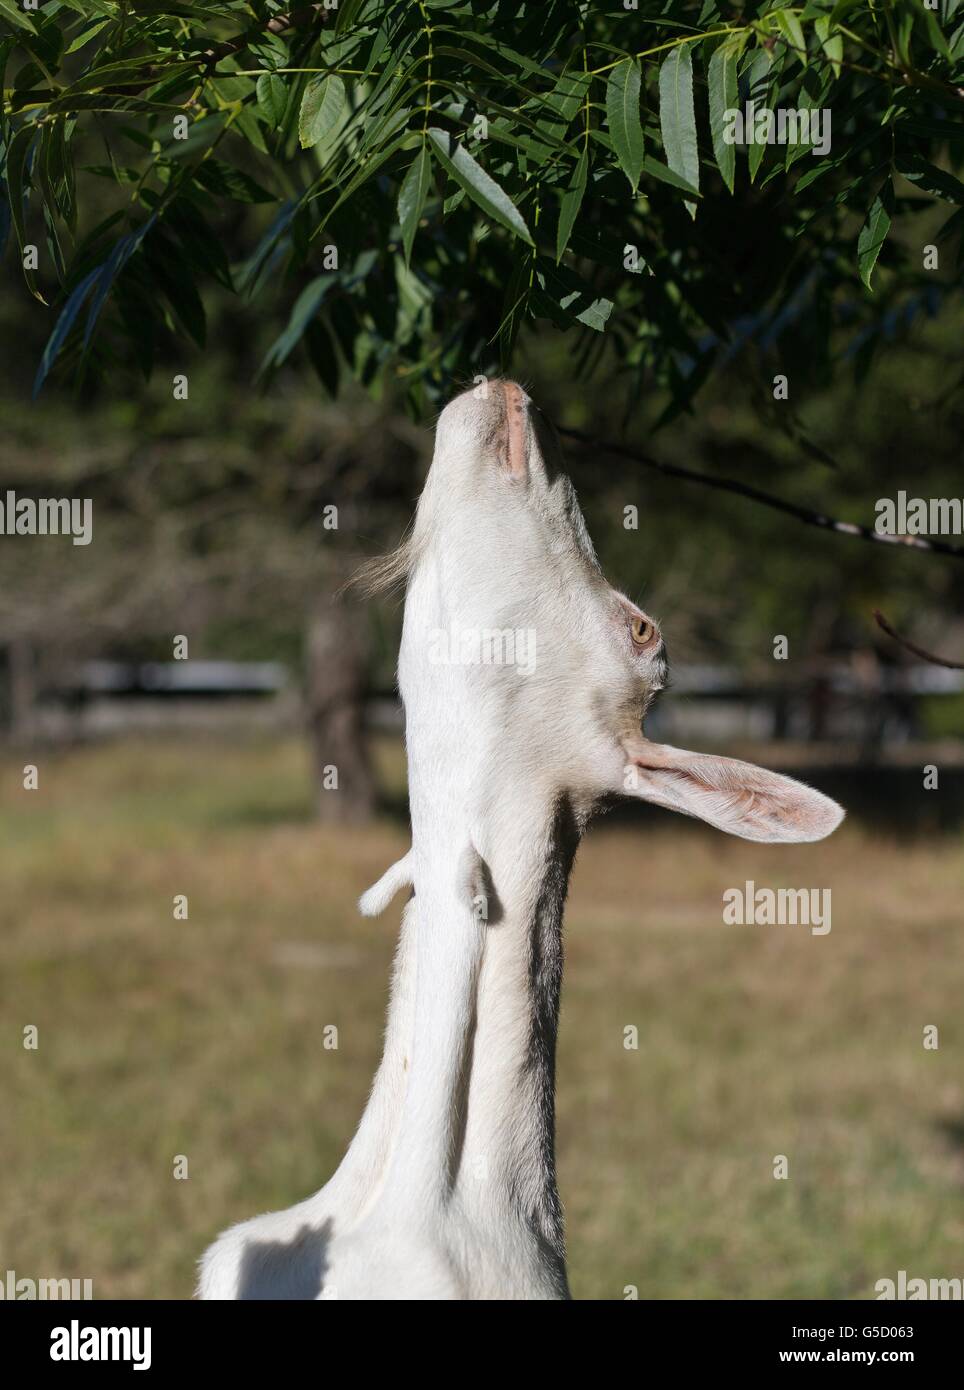 A white goat reaching up into a tree to eat leaves. Stock Photo